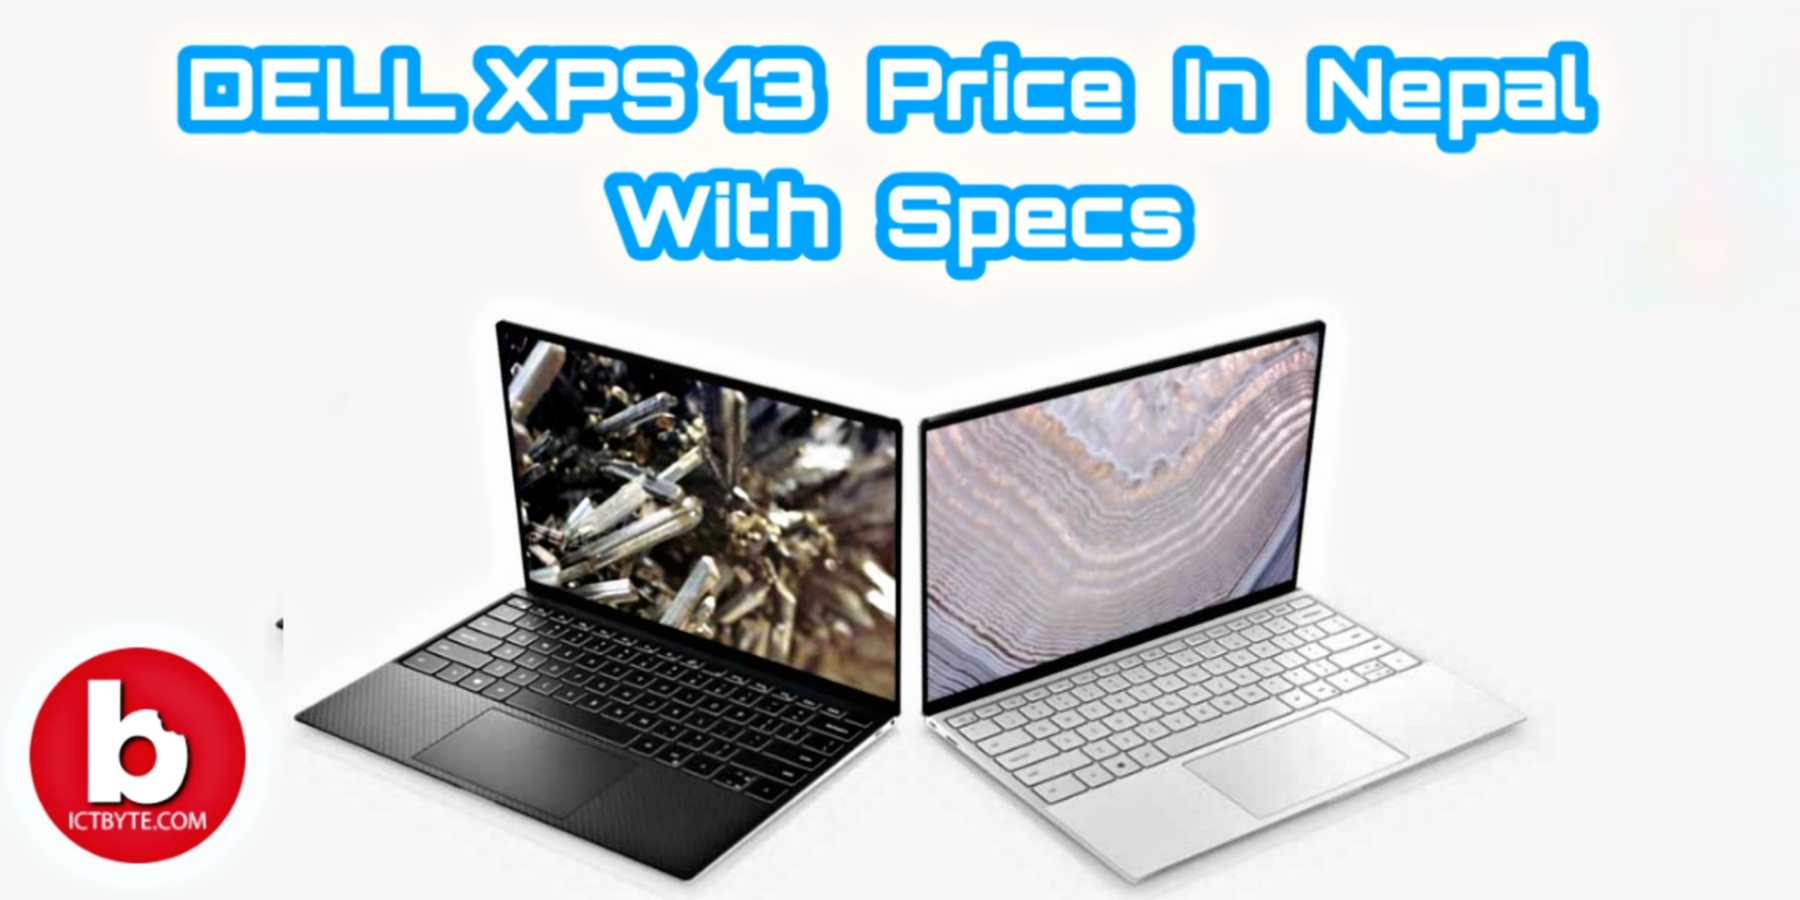 DELL XPS 13 specs and prices in Nepal